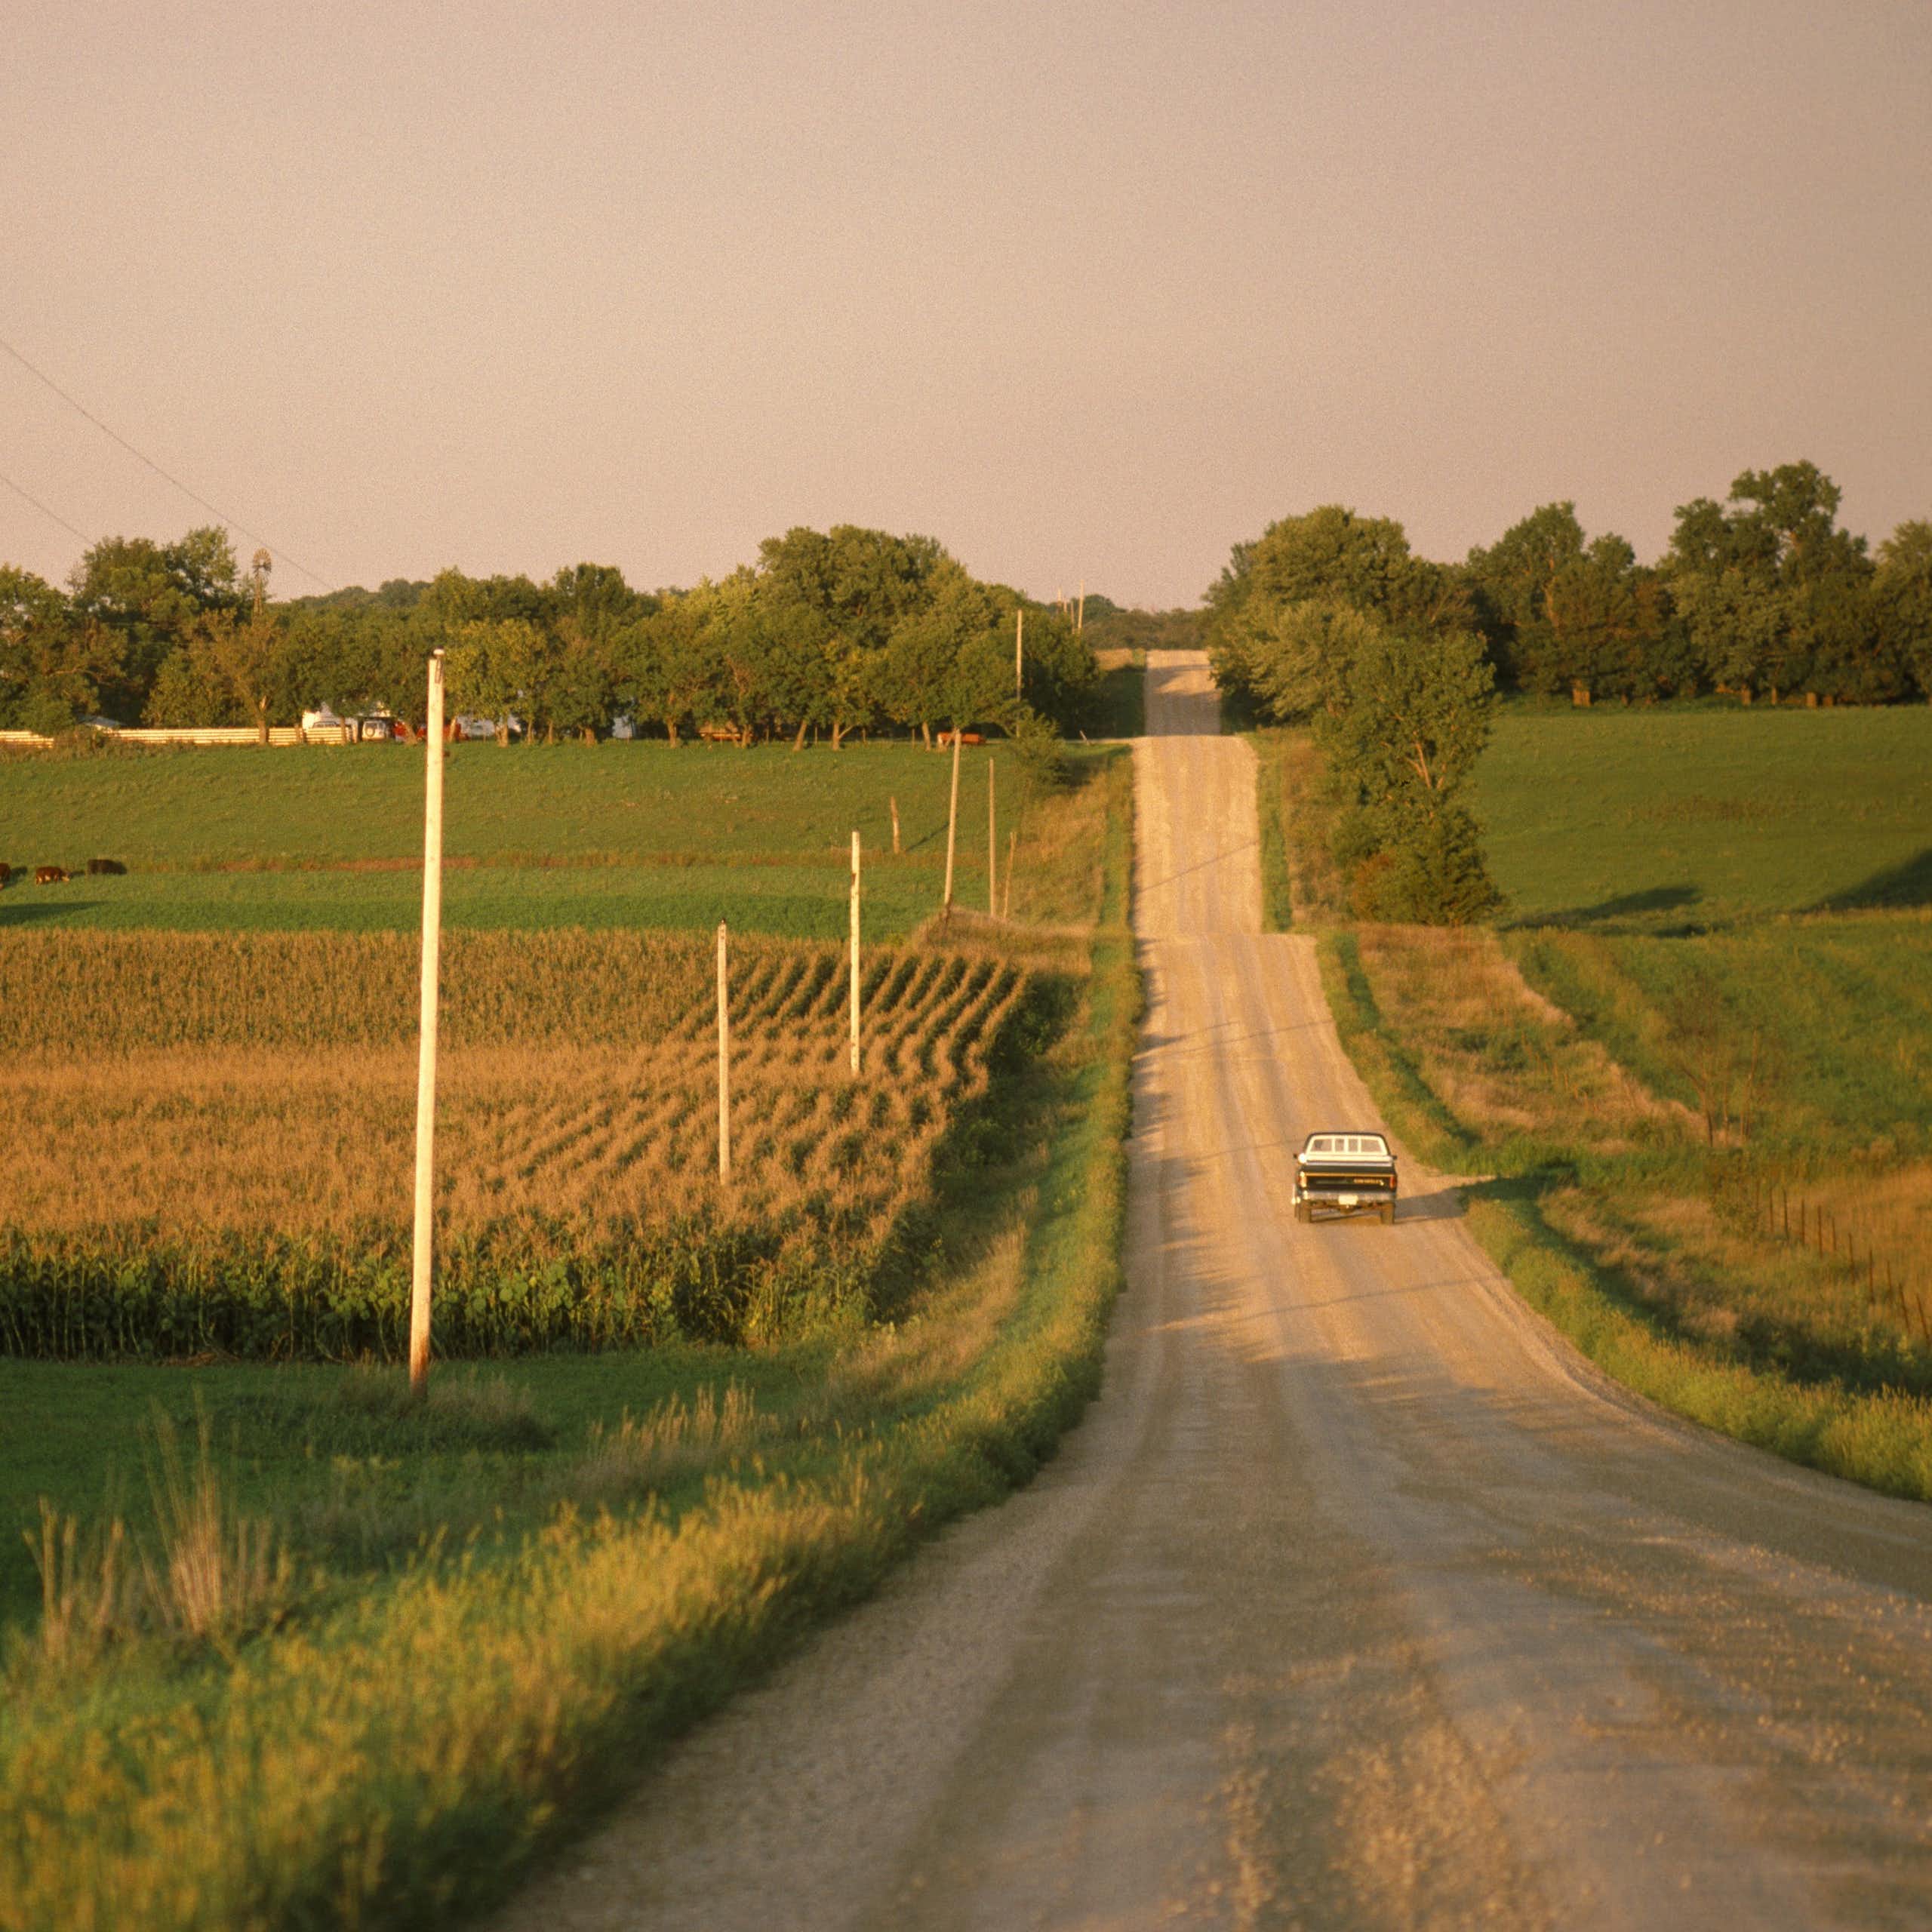 A truck moves past a farm as it drives down a gravel road in a rural area.